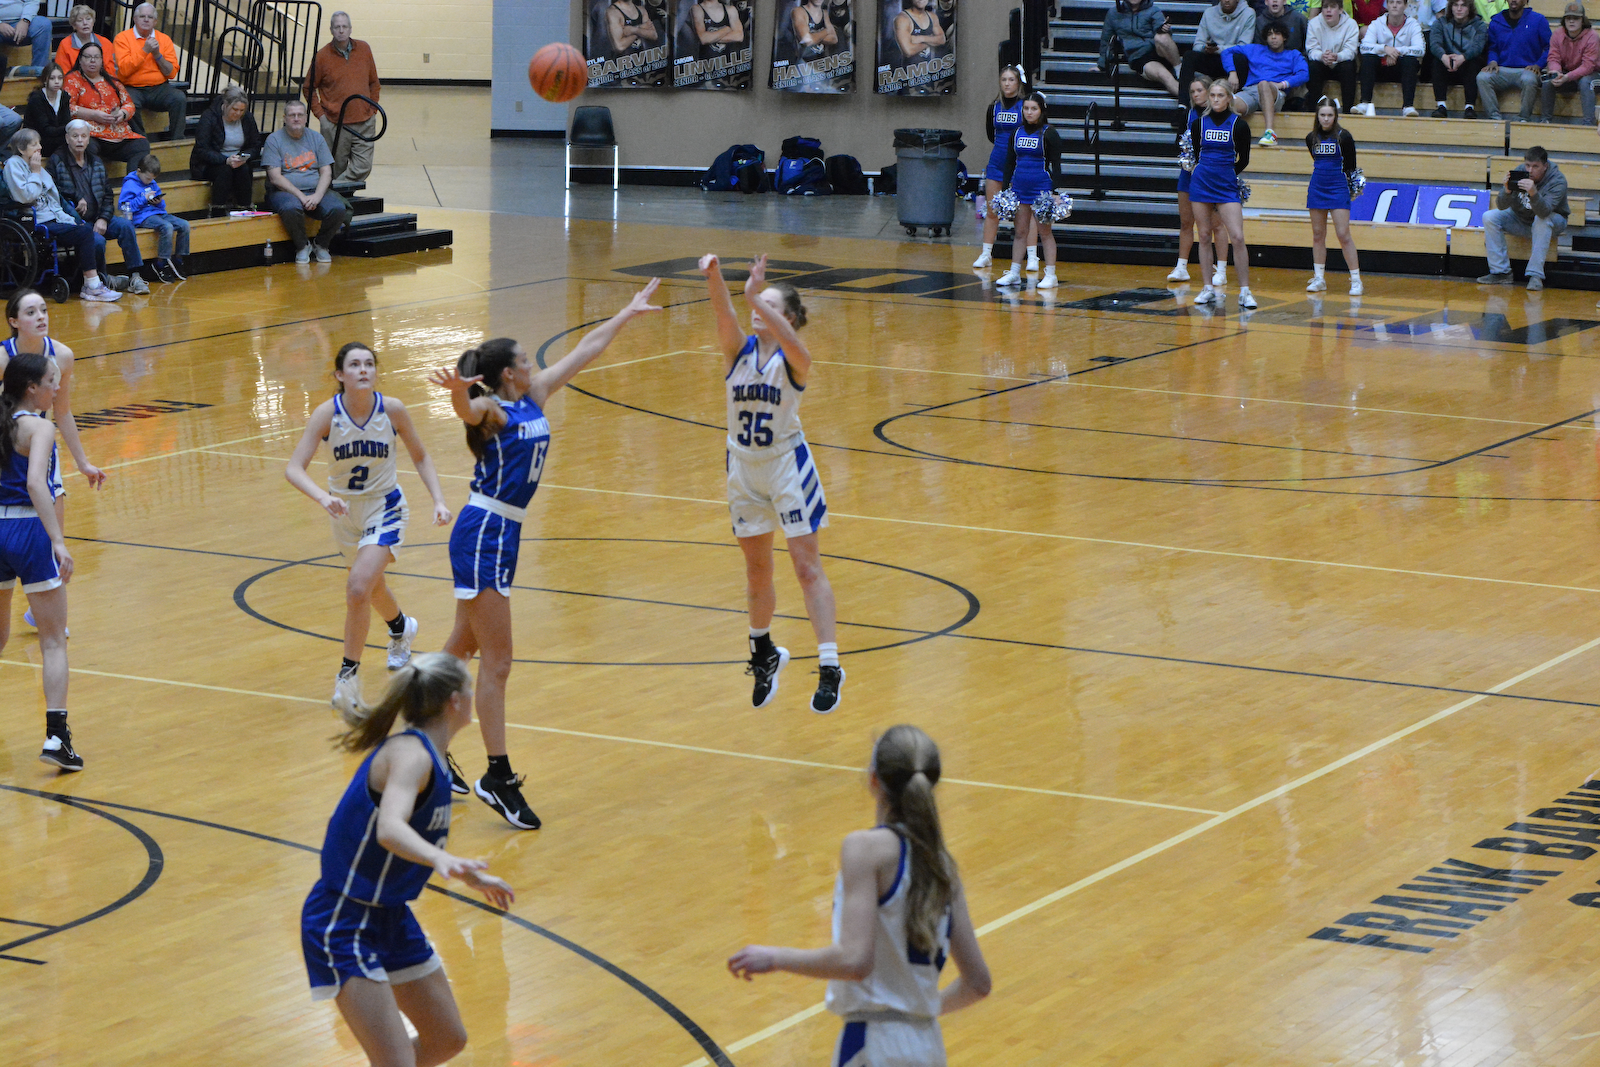 Girls basketball season concludes with 48-45 loss to Franklin cover photo